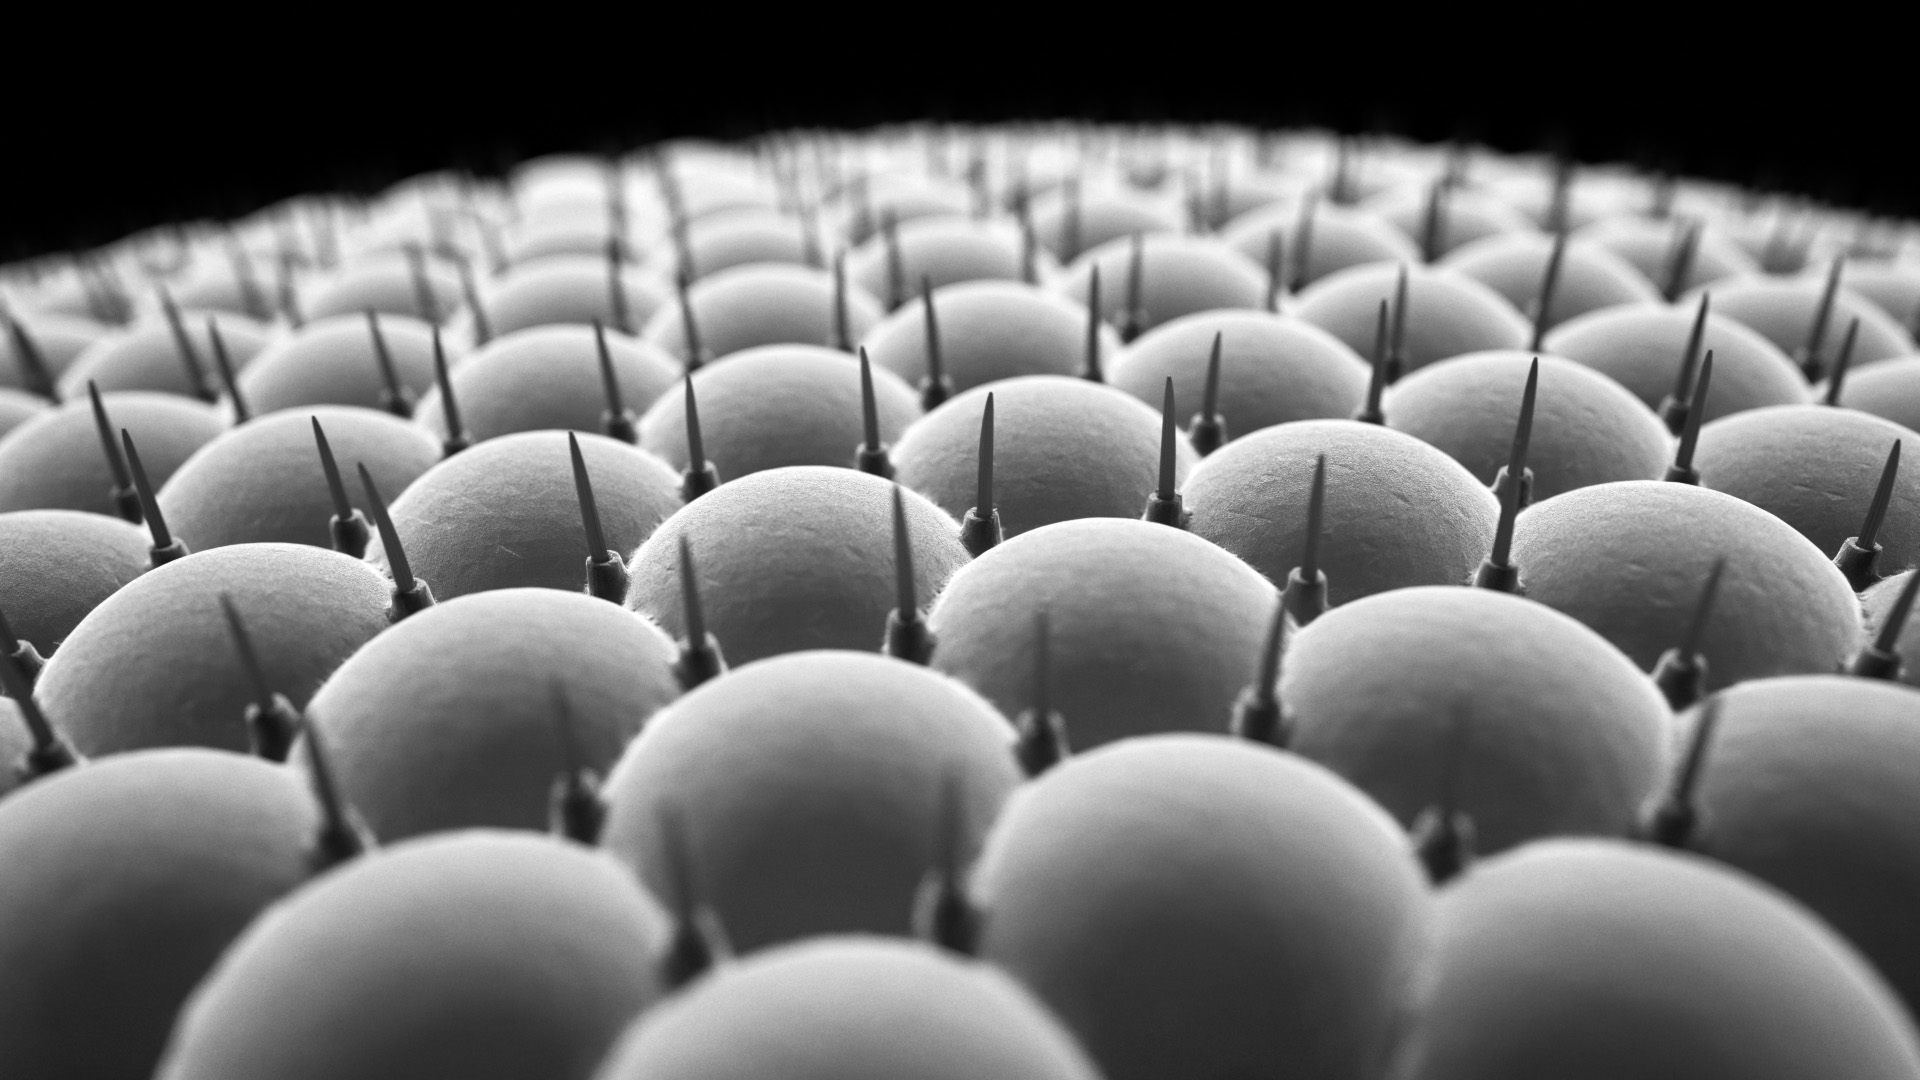 3D render of a compound eye at very high magnification. The shading simulates a high-contrast black and white look usually found in images produced via scanning electron microscopy.